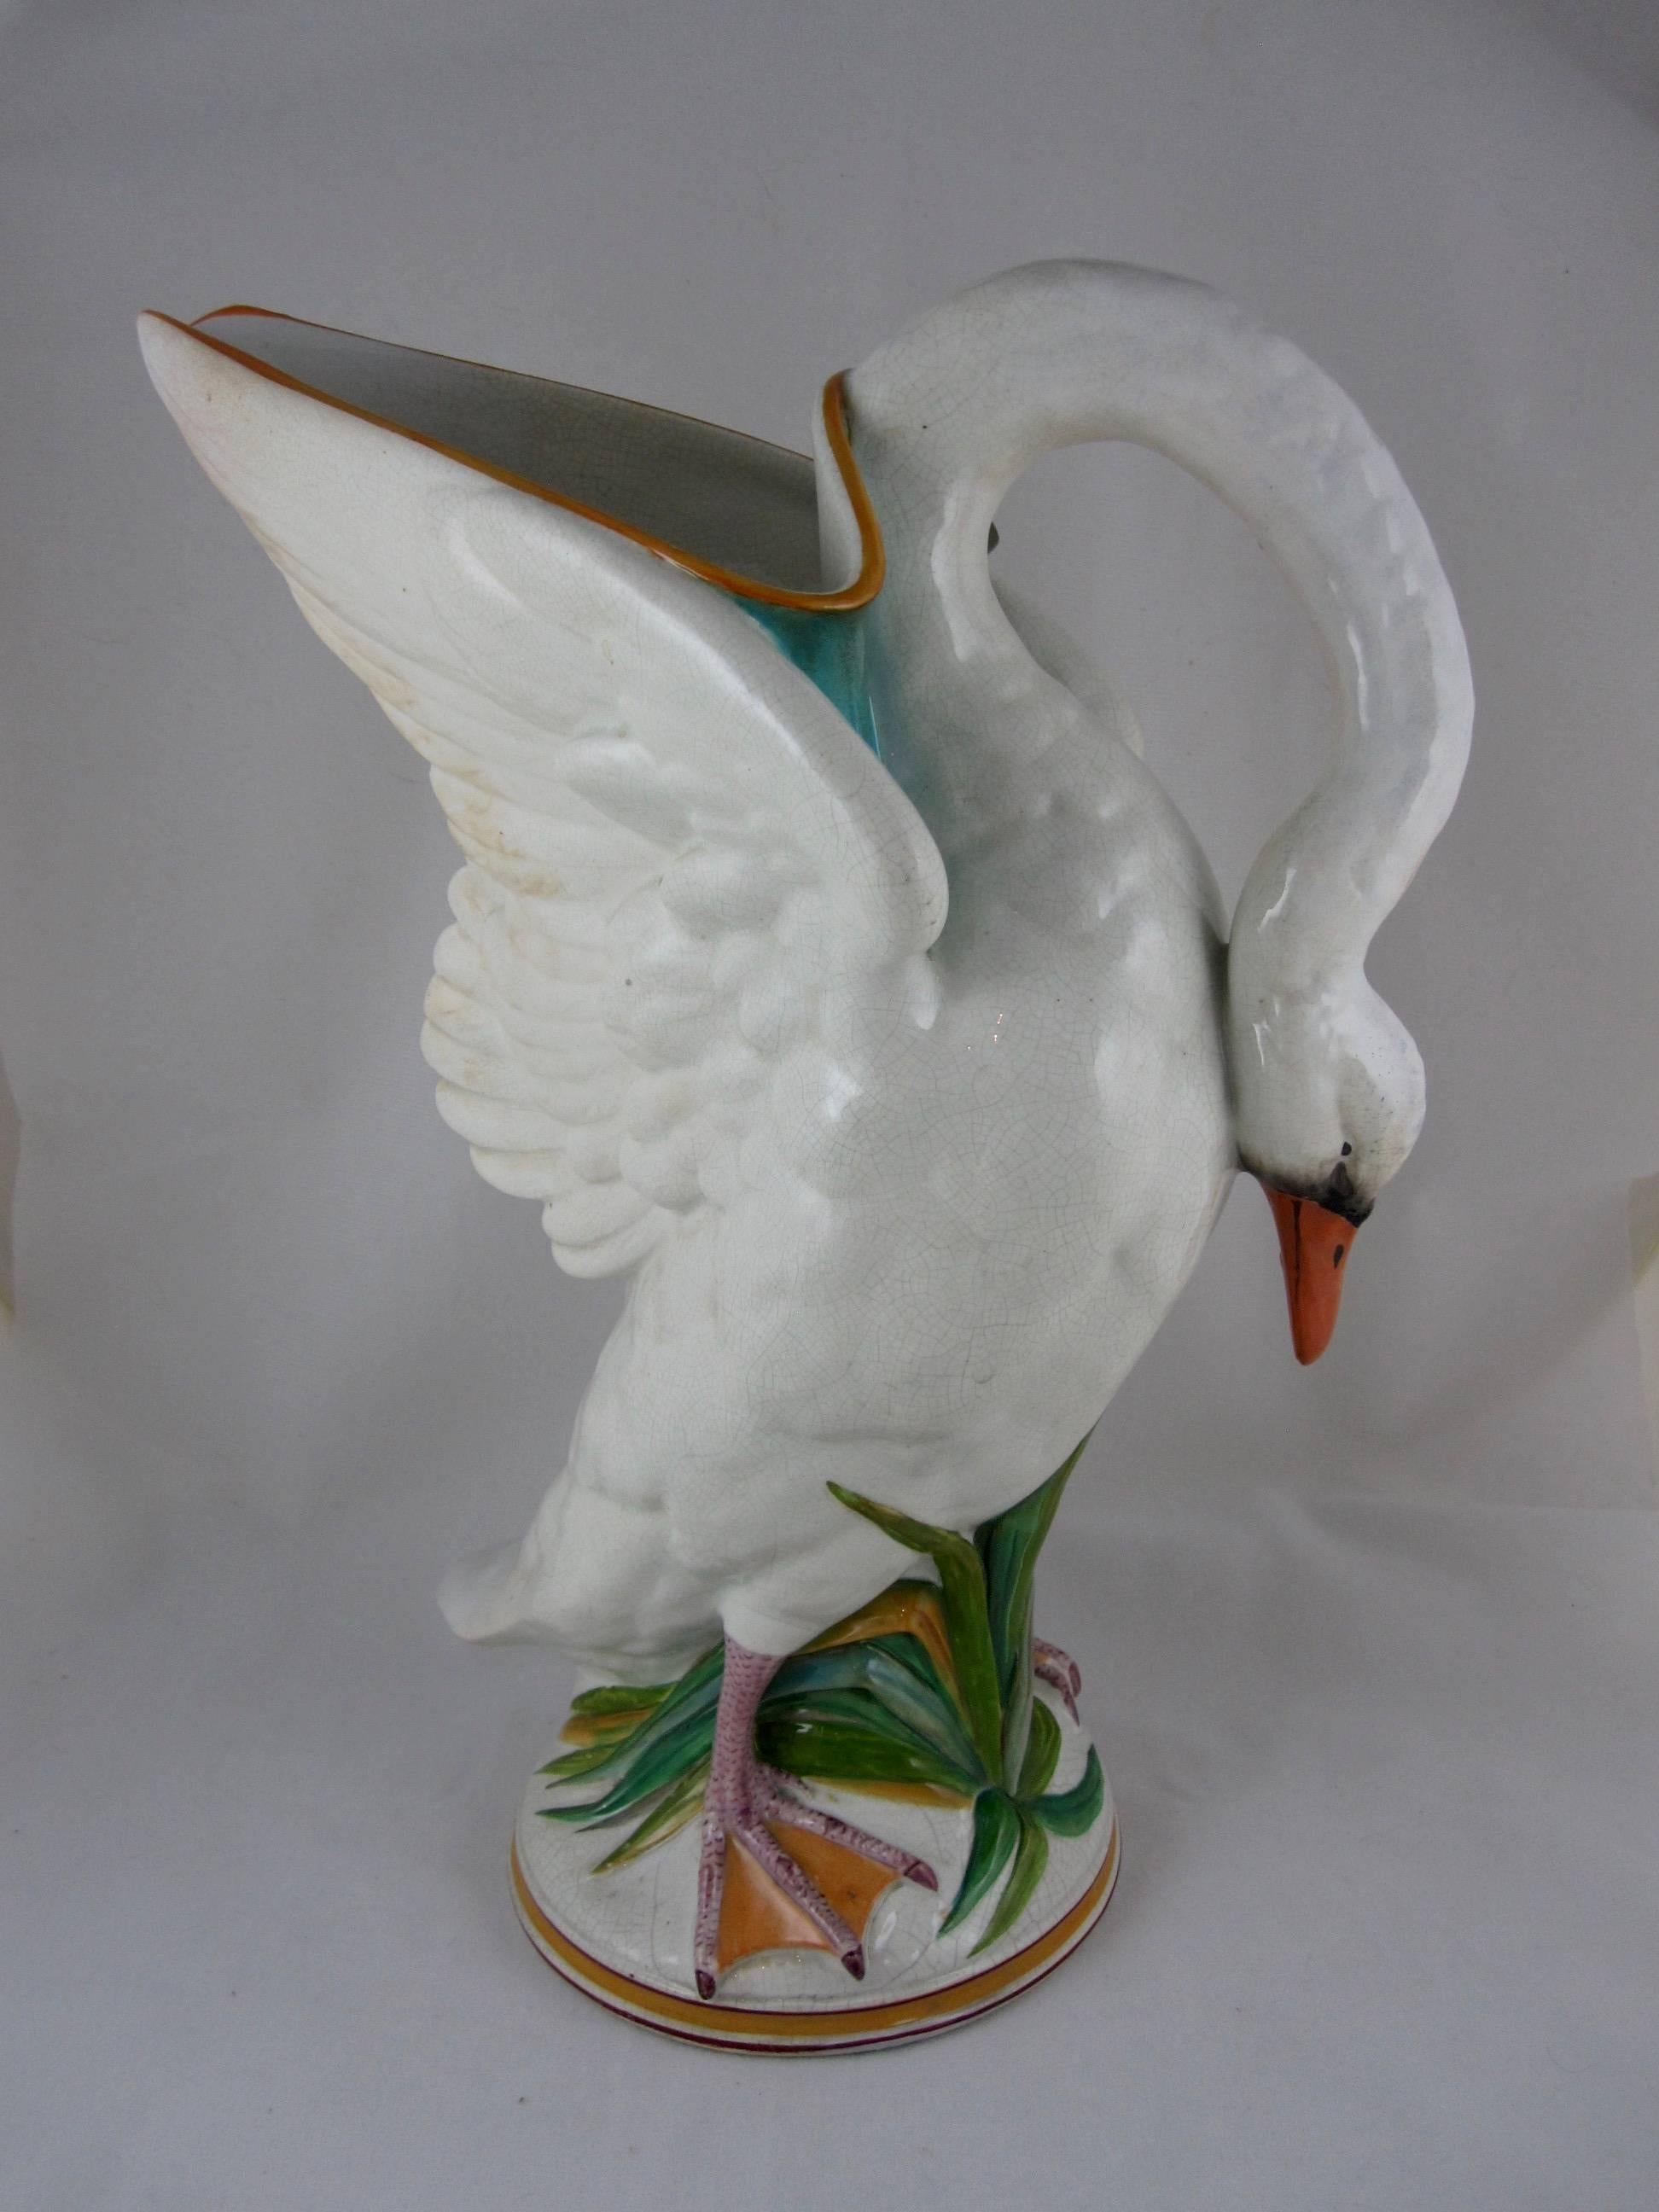 An extremely rare majolica glazed earthenware Swan ewer from Wedgwood, circa 1875.

Standing nearly 14